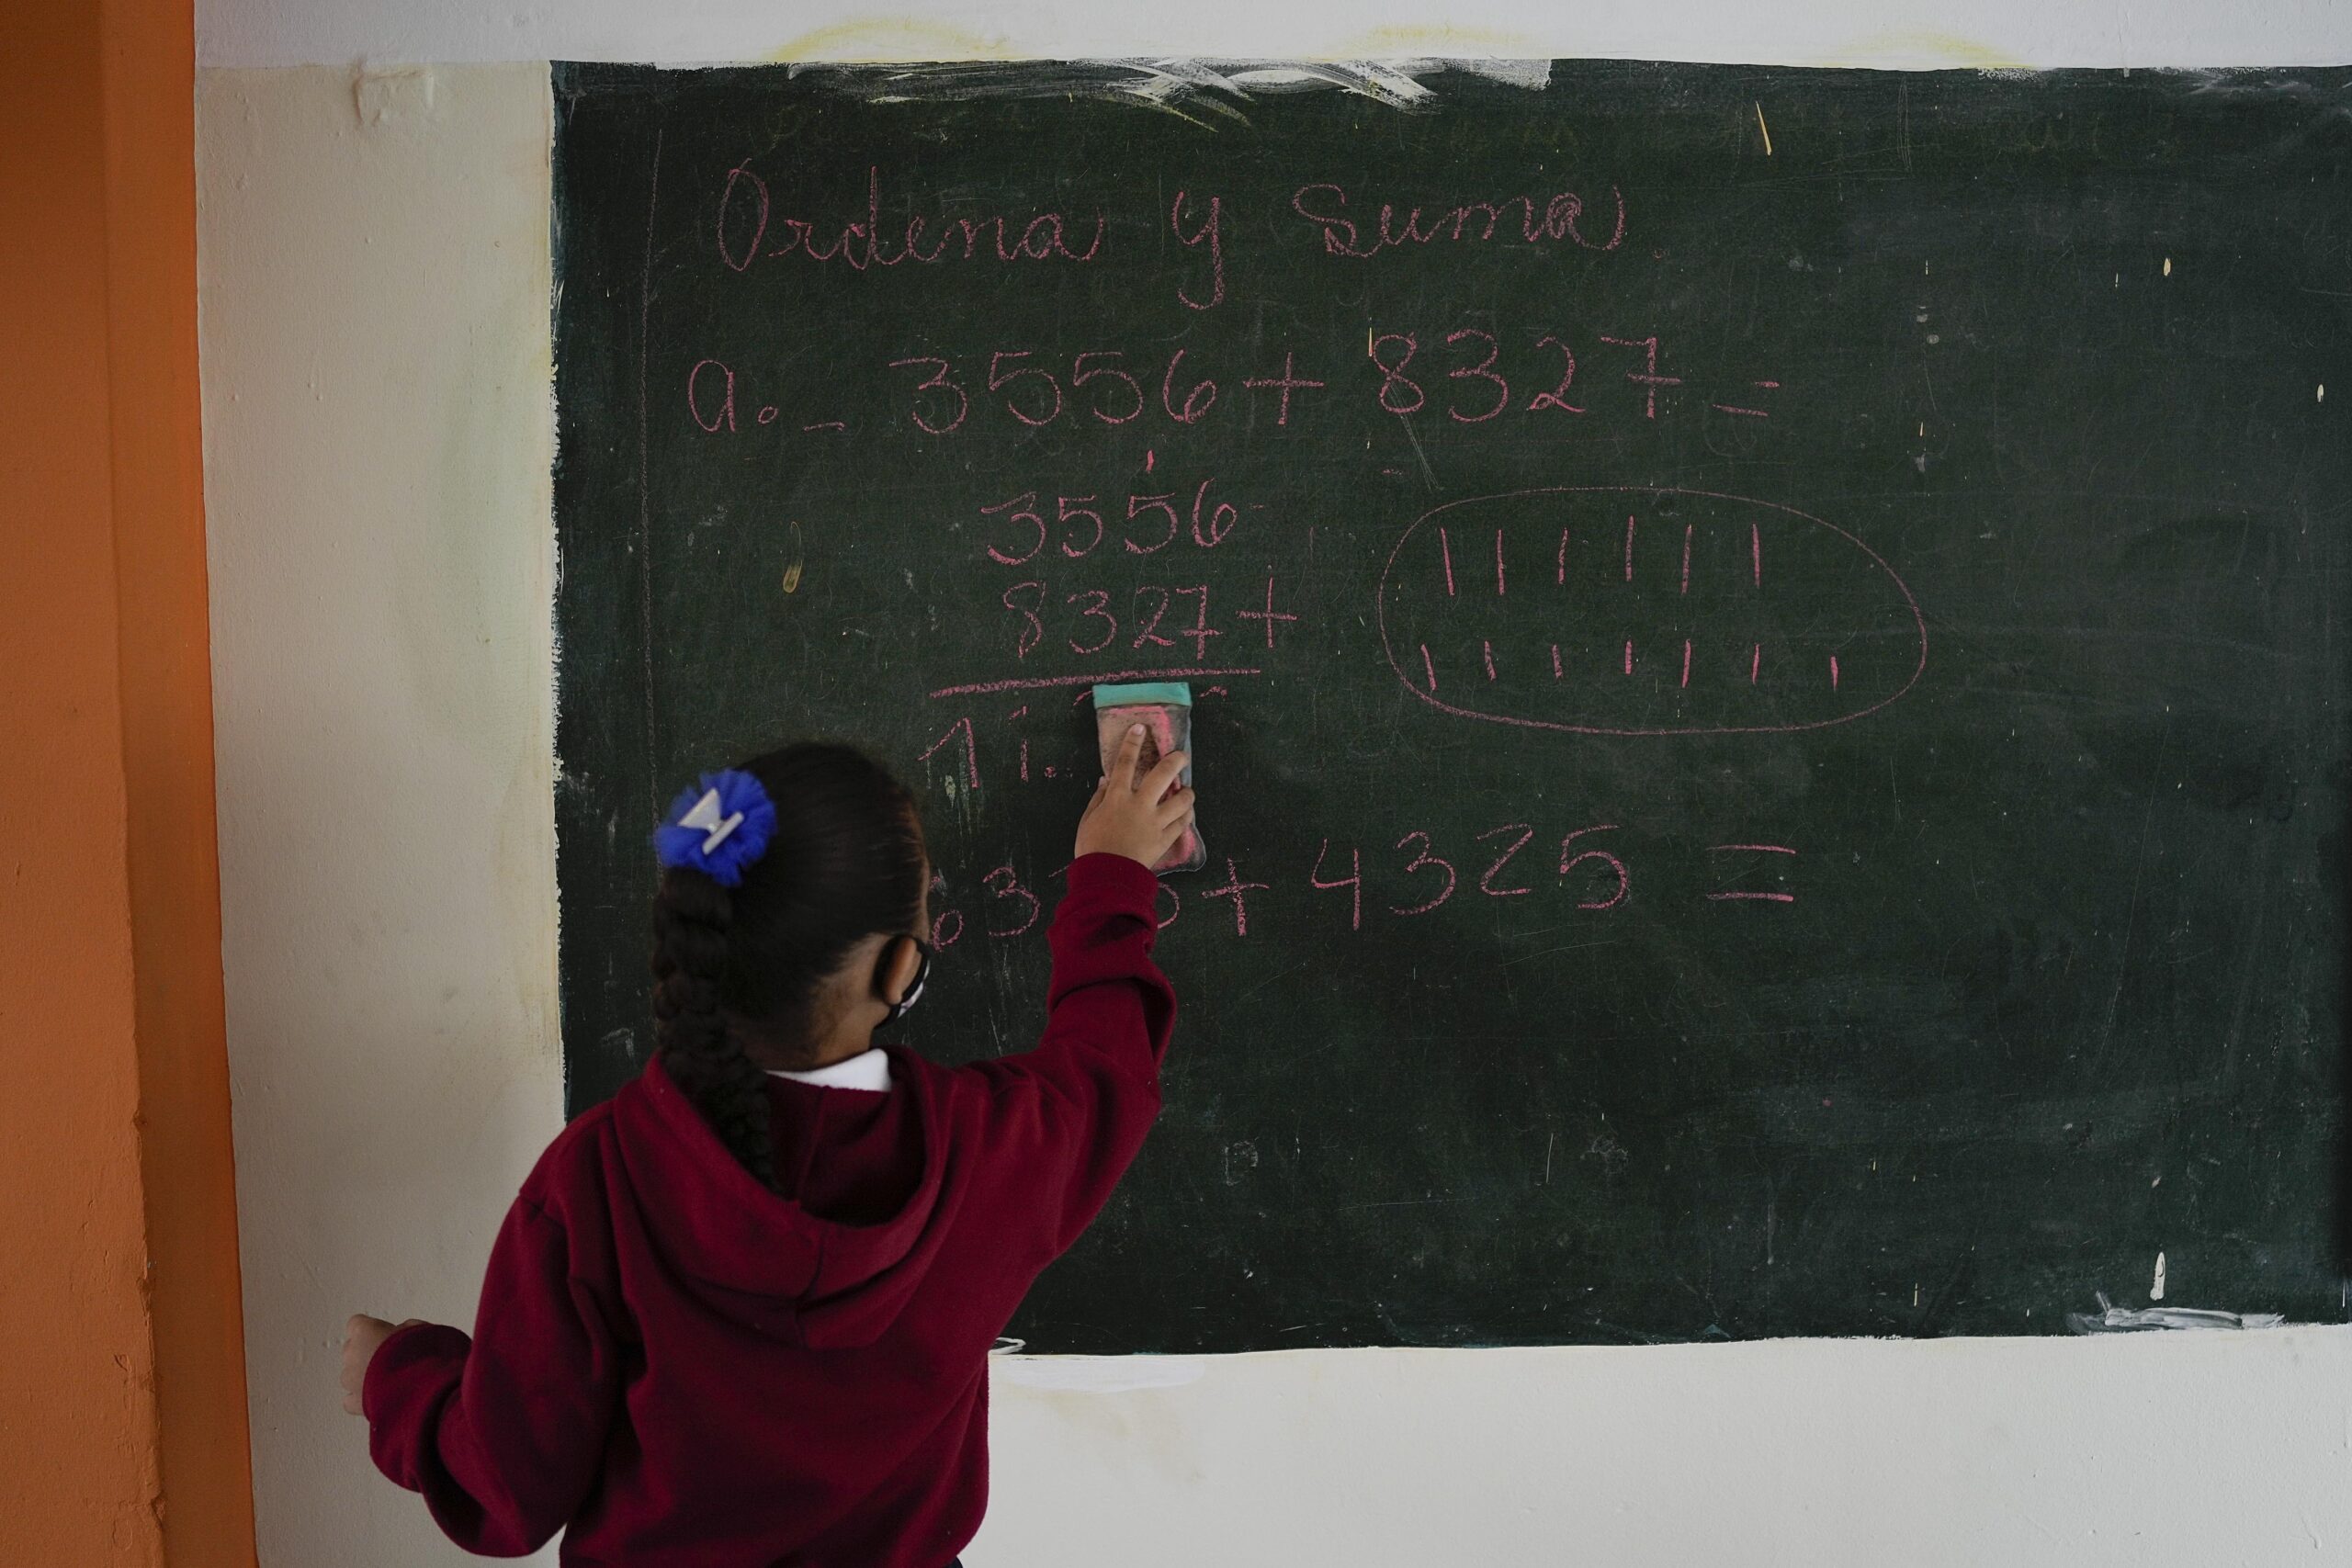 A little girl erases a math problem from the chalkboard.